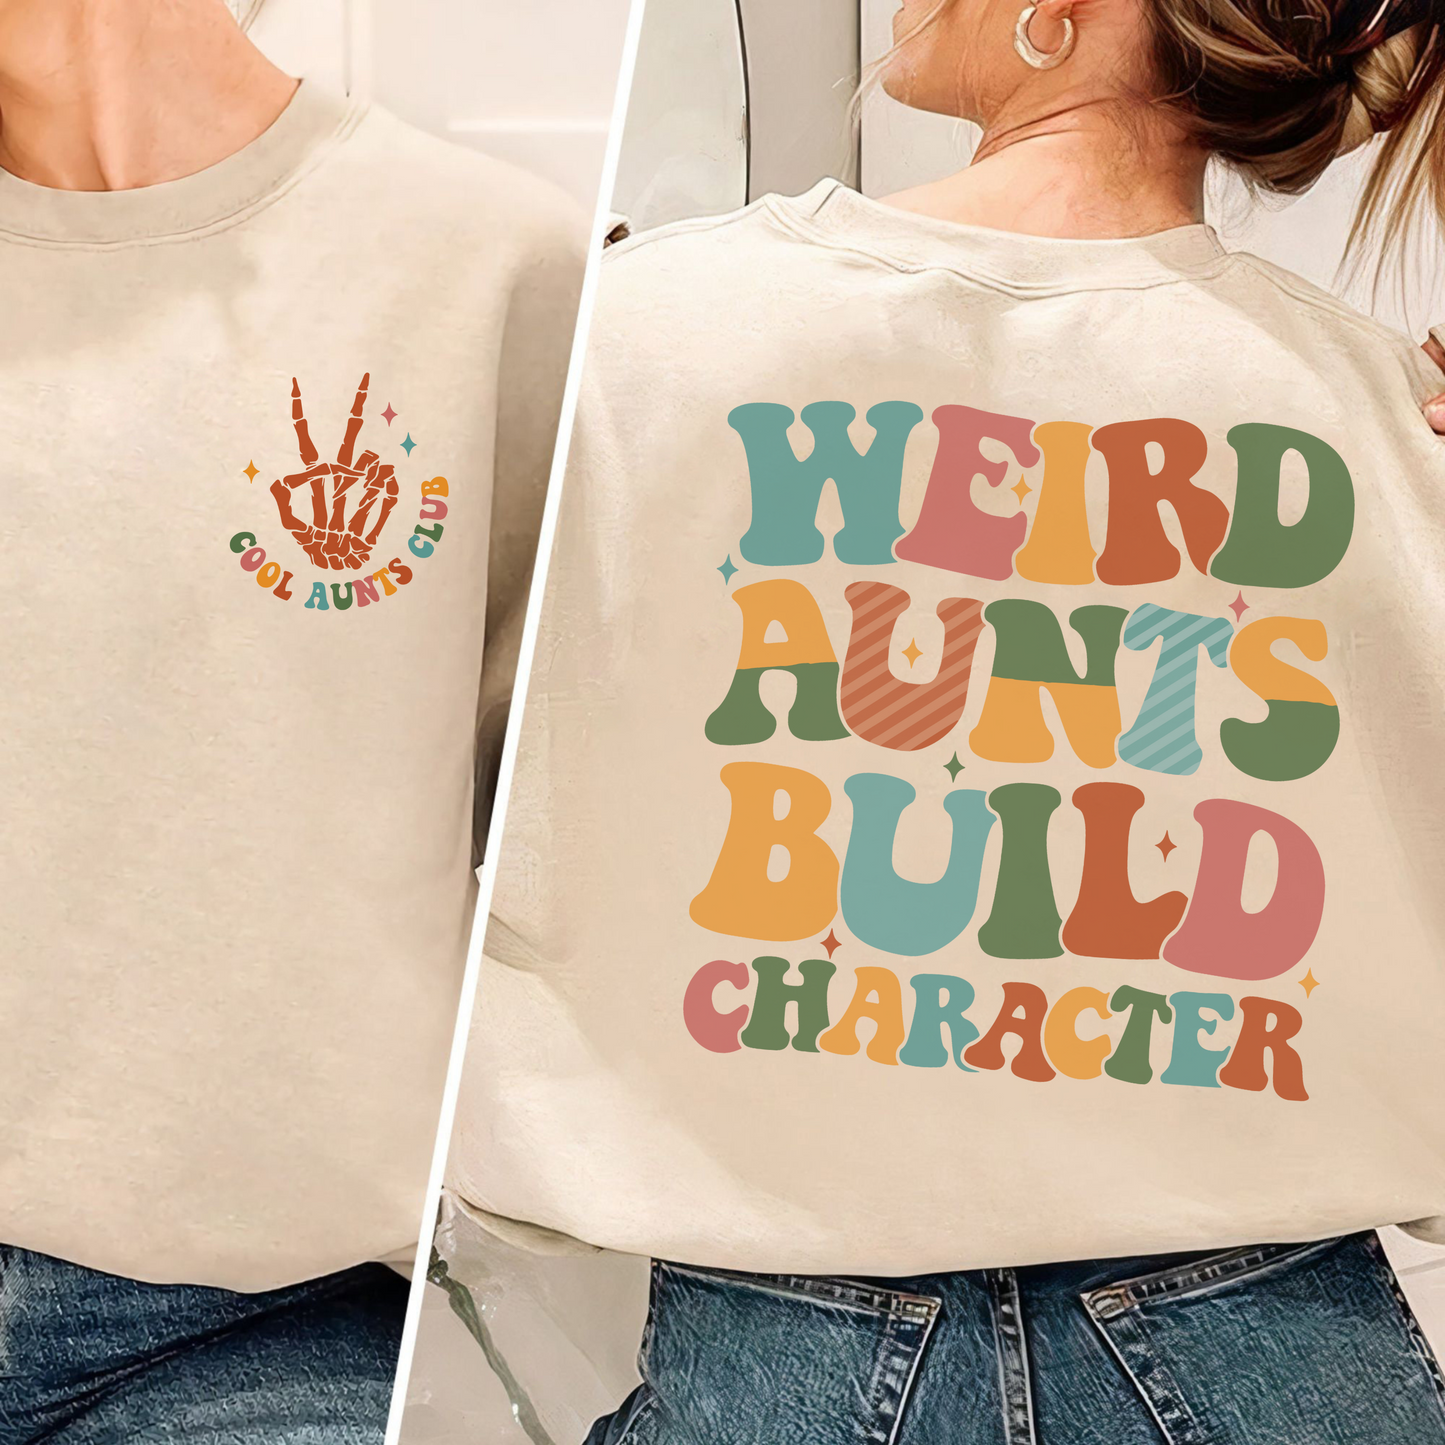 Quirky Aunt's Charm – Character Building Fun Gift